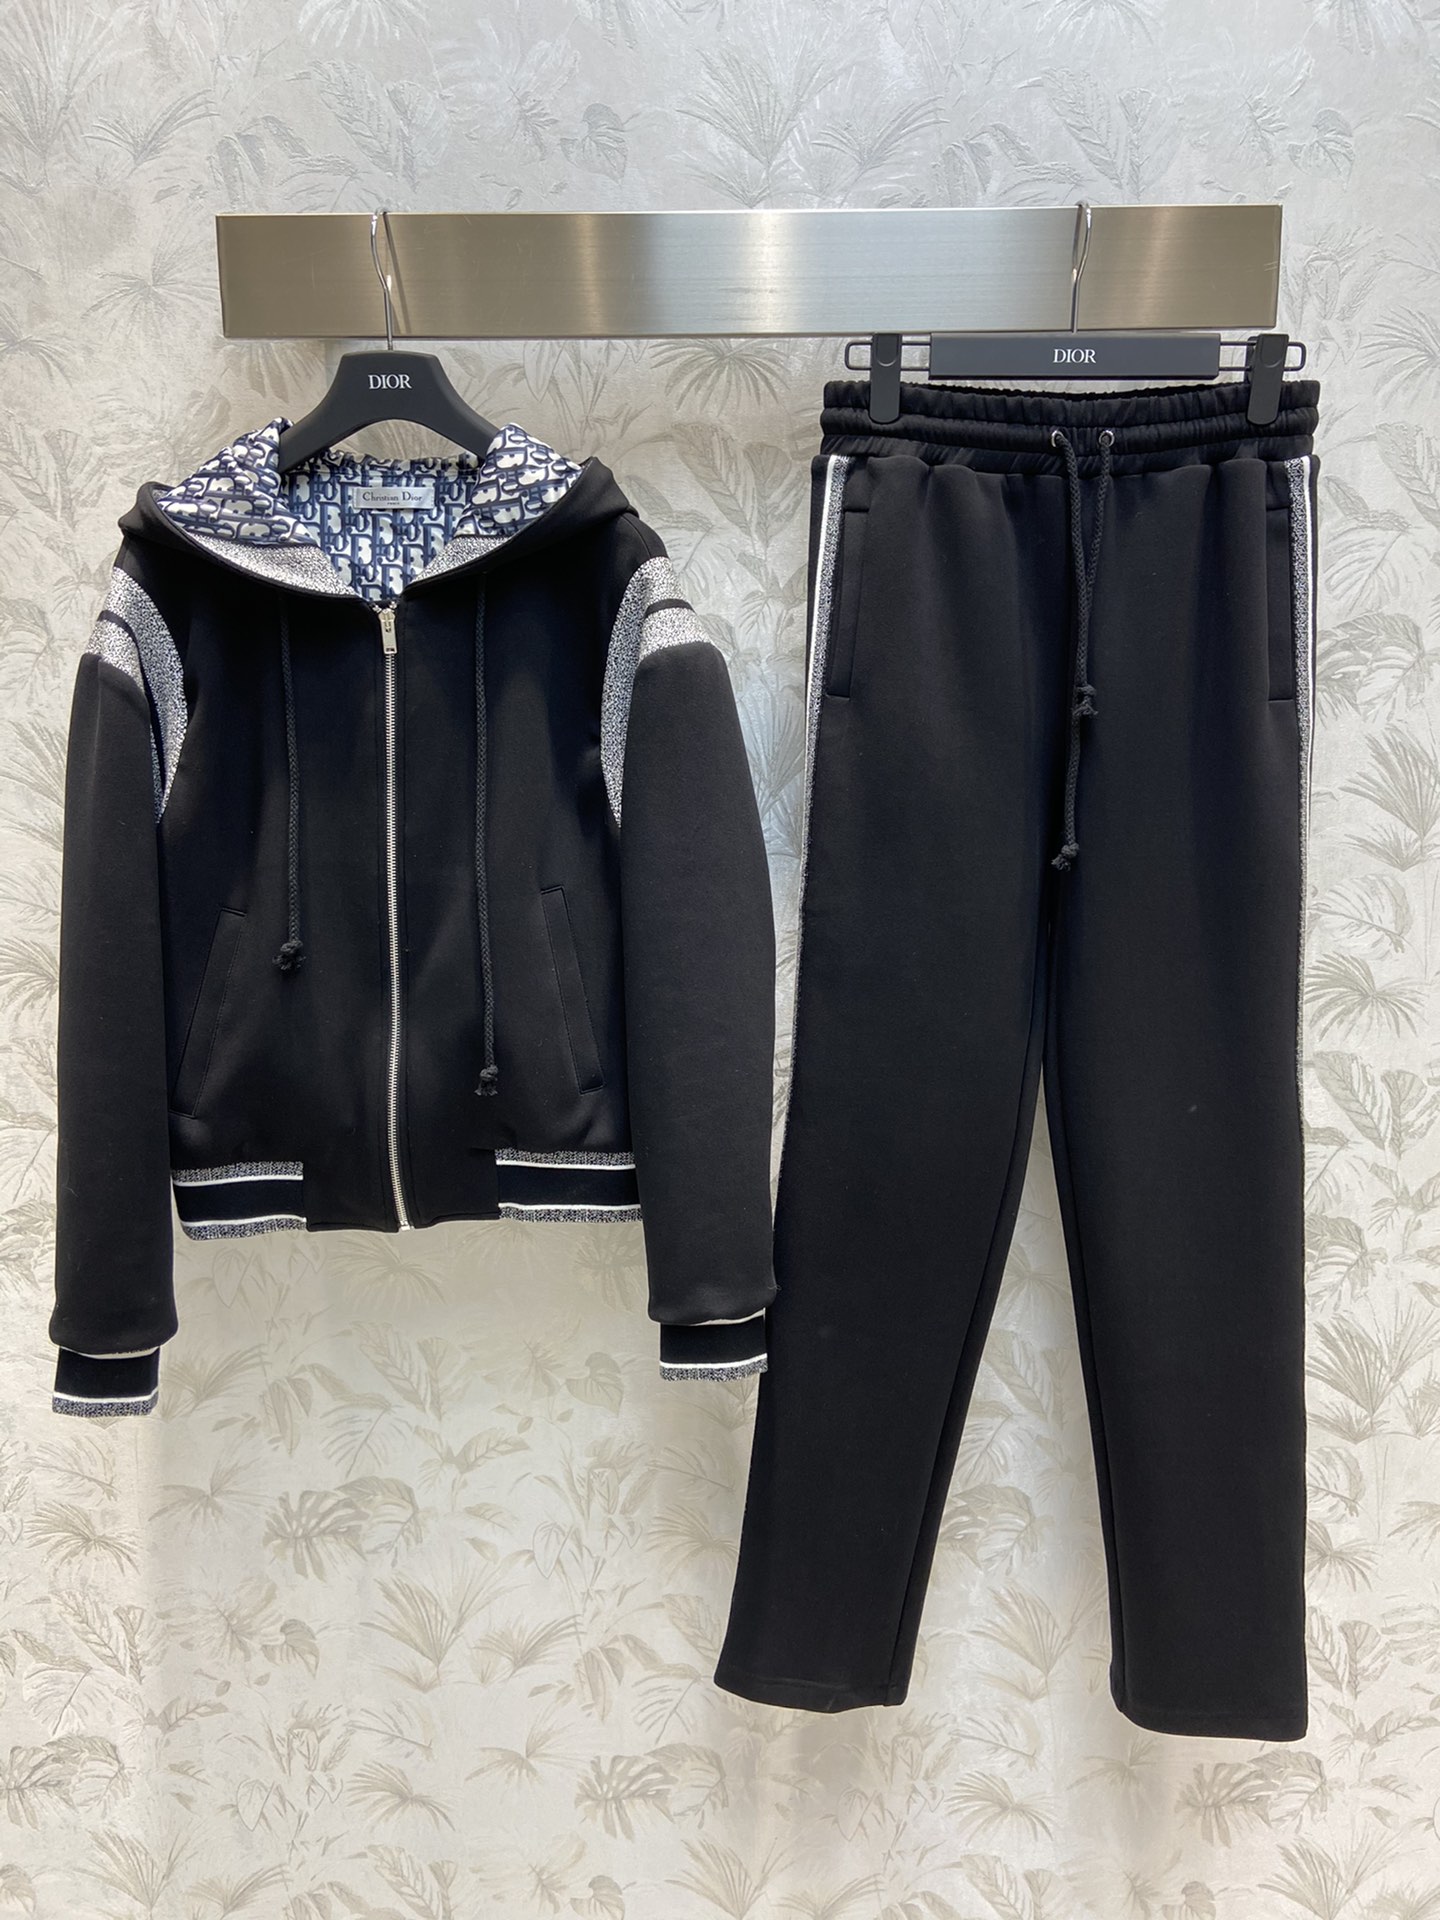 Dior Clothing Cardigans Coats & Jackets Pants & Trousers Two Piece Outfits & Matching Sets Splicing Cotton Knitting Fall/Winter Collection Hooded Top